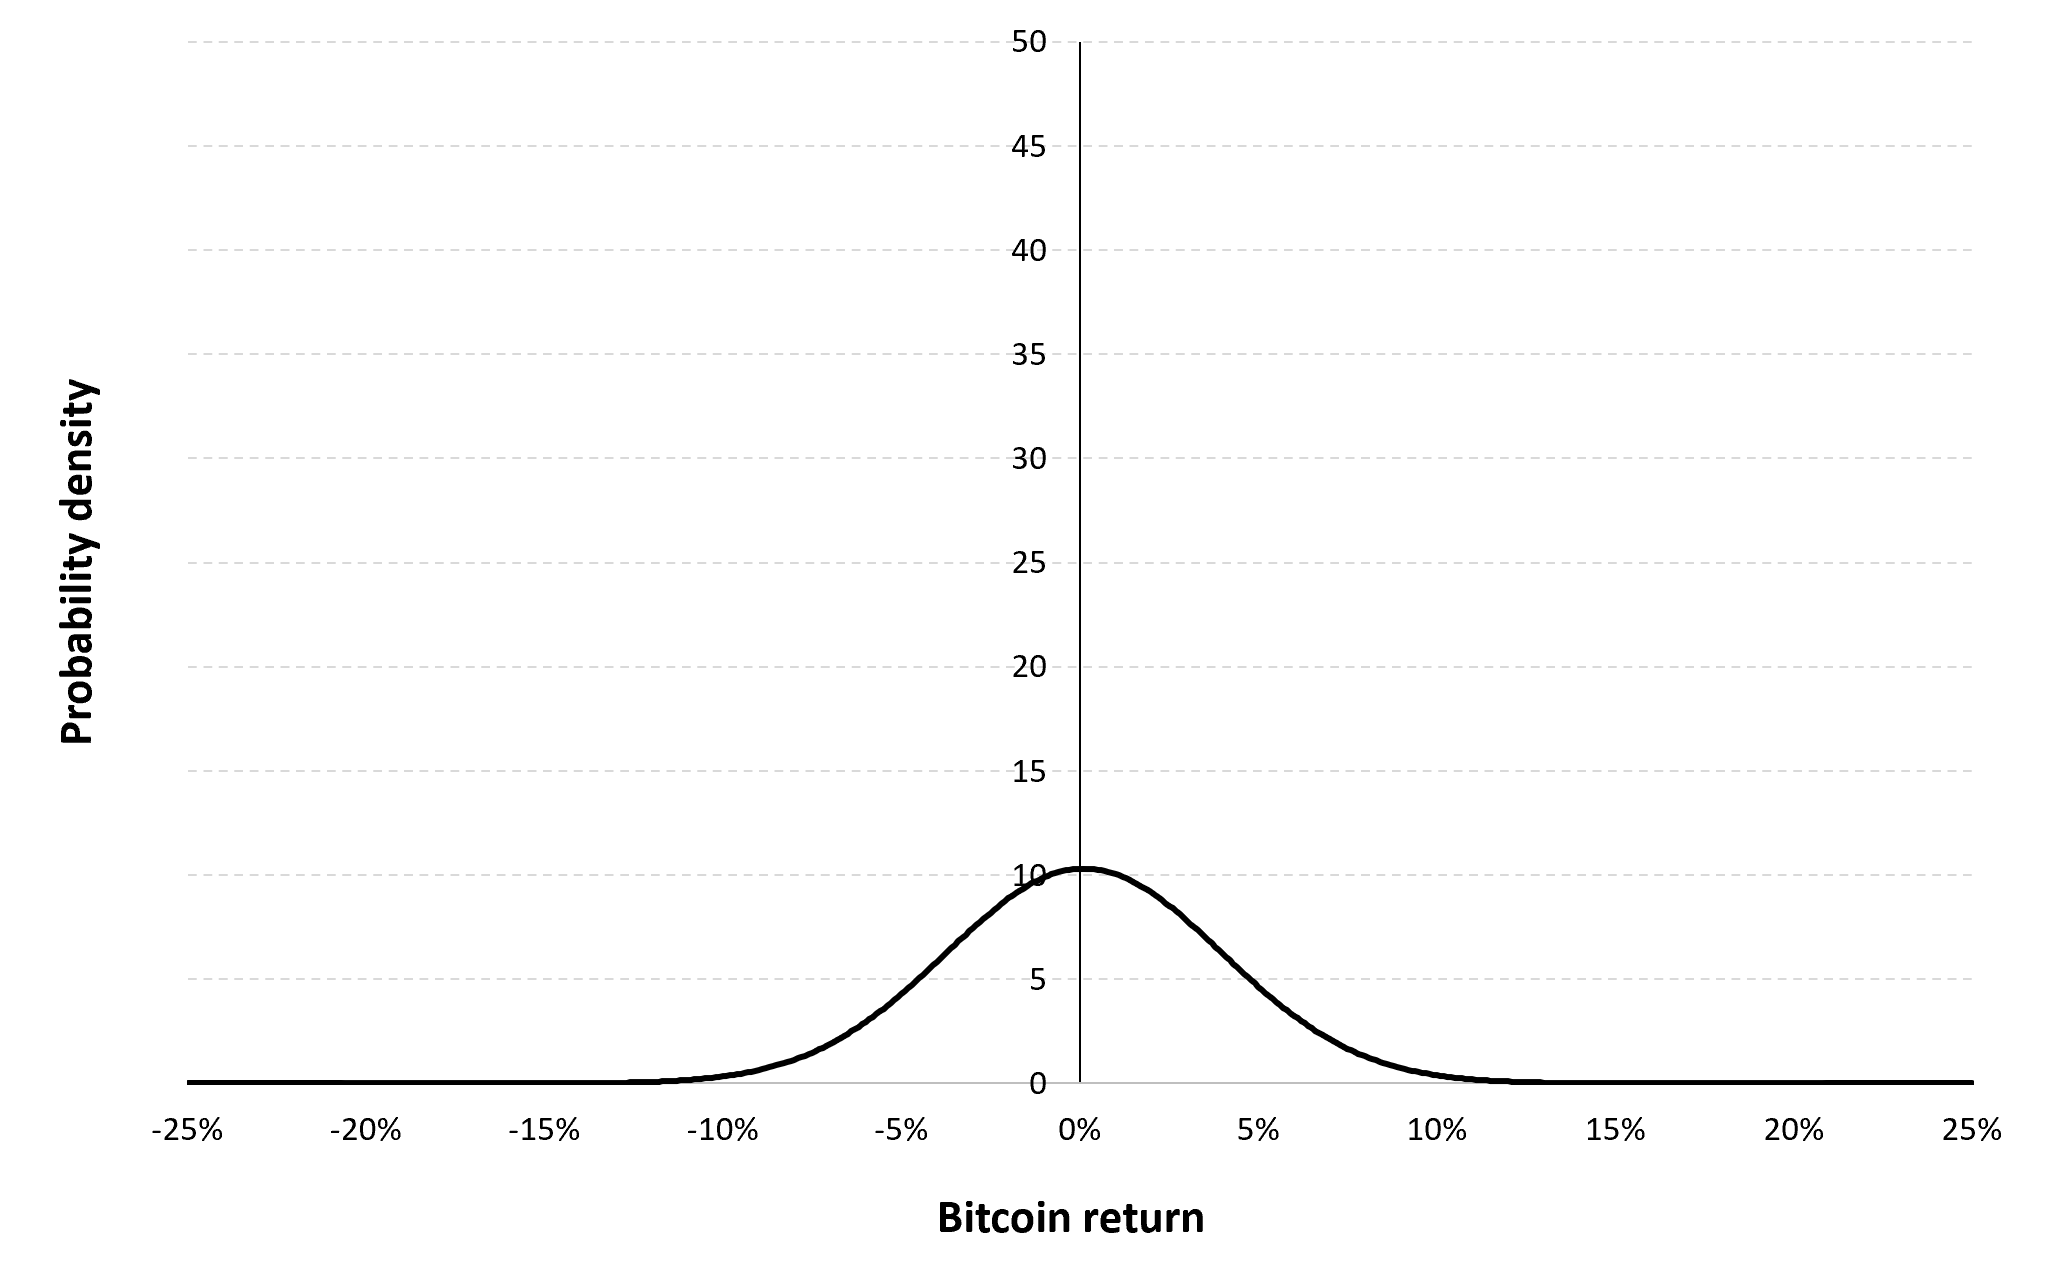 Gaussian distribution of the daily Bitcoin returns